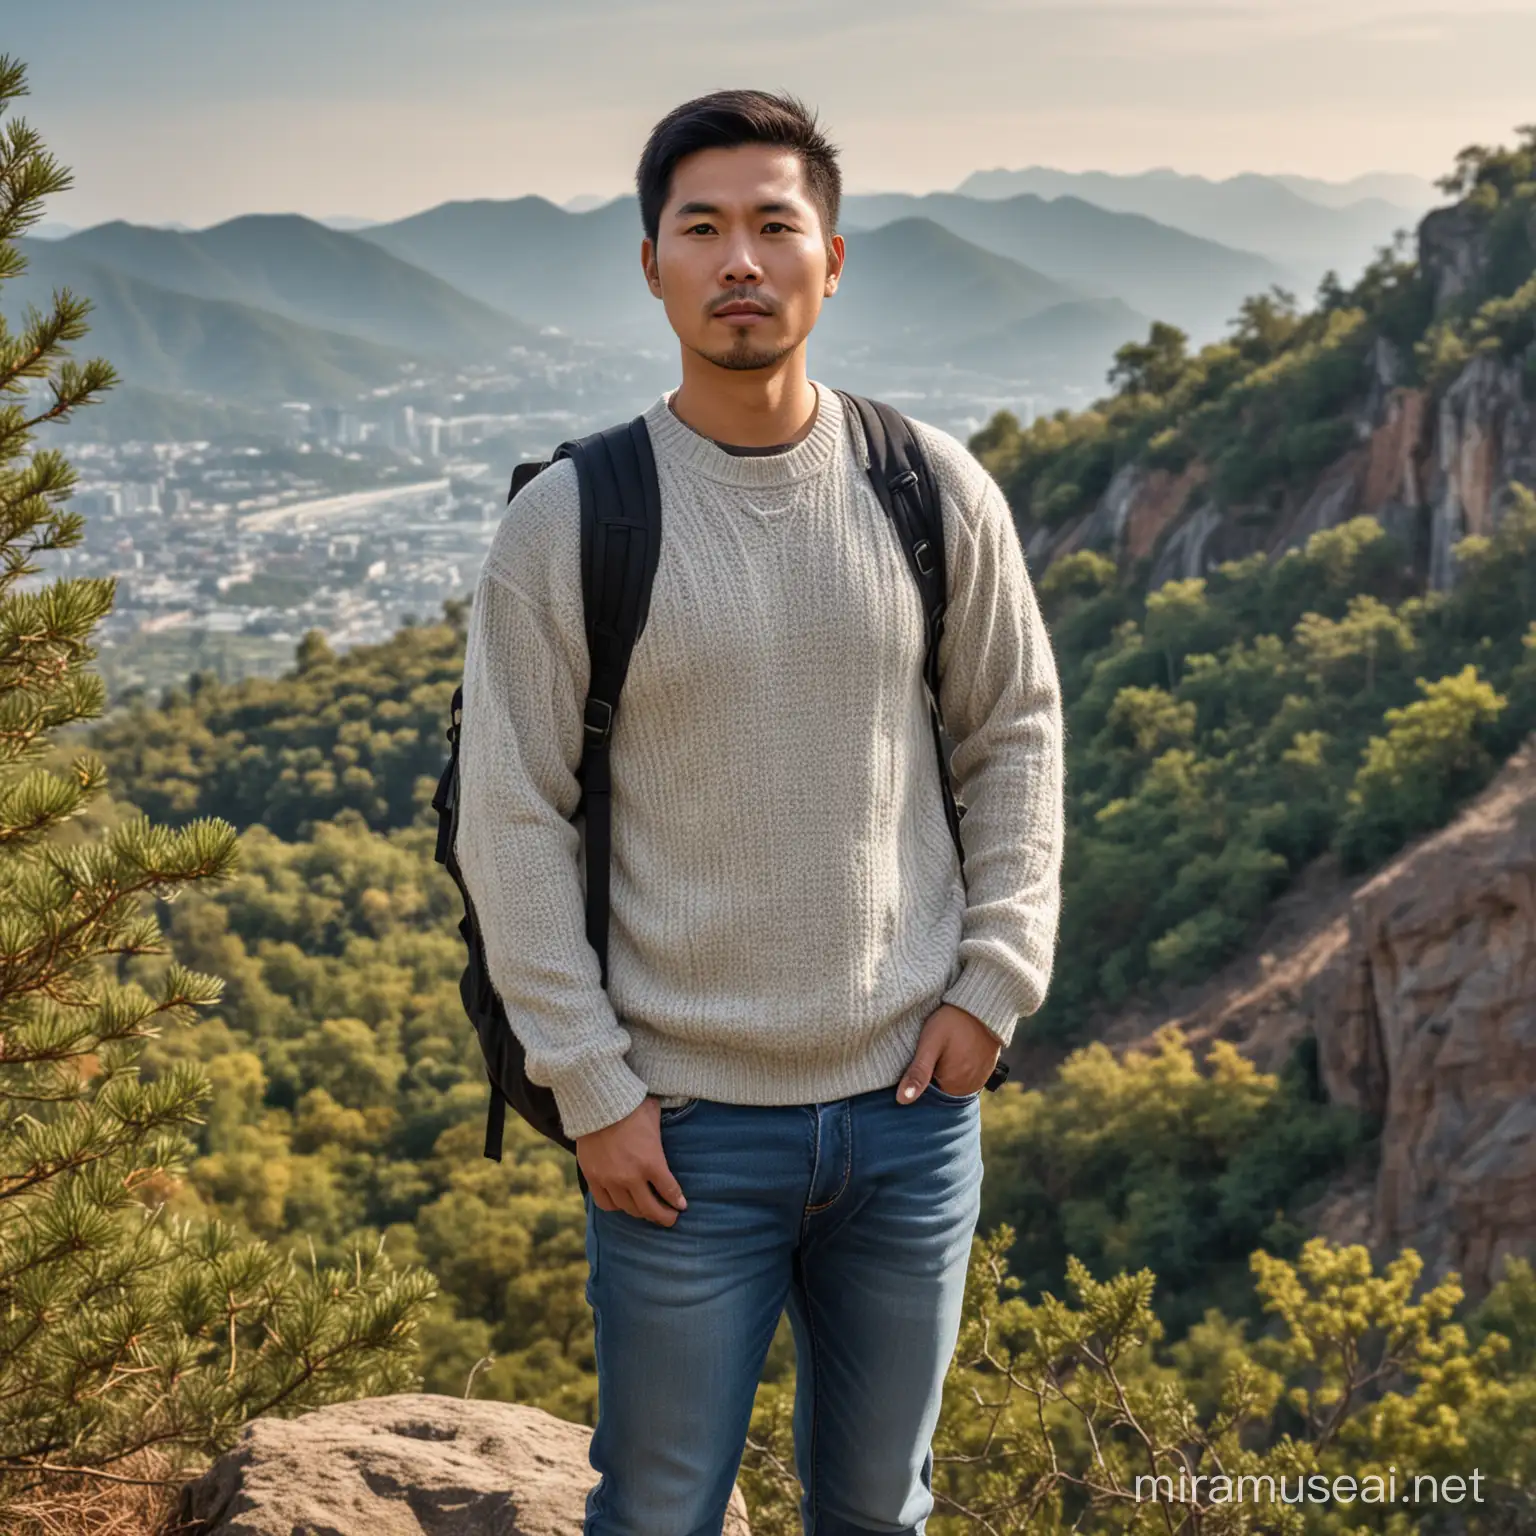 Asian Man with Curvy Figure Poses on Mountain Cliff in Sweater and Jeans